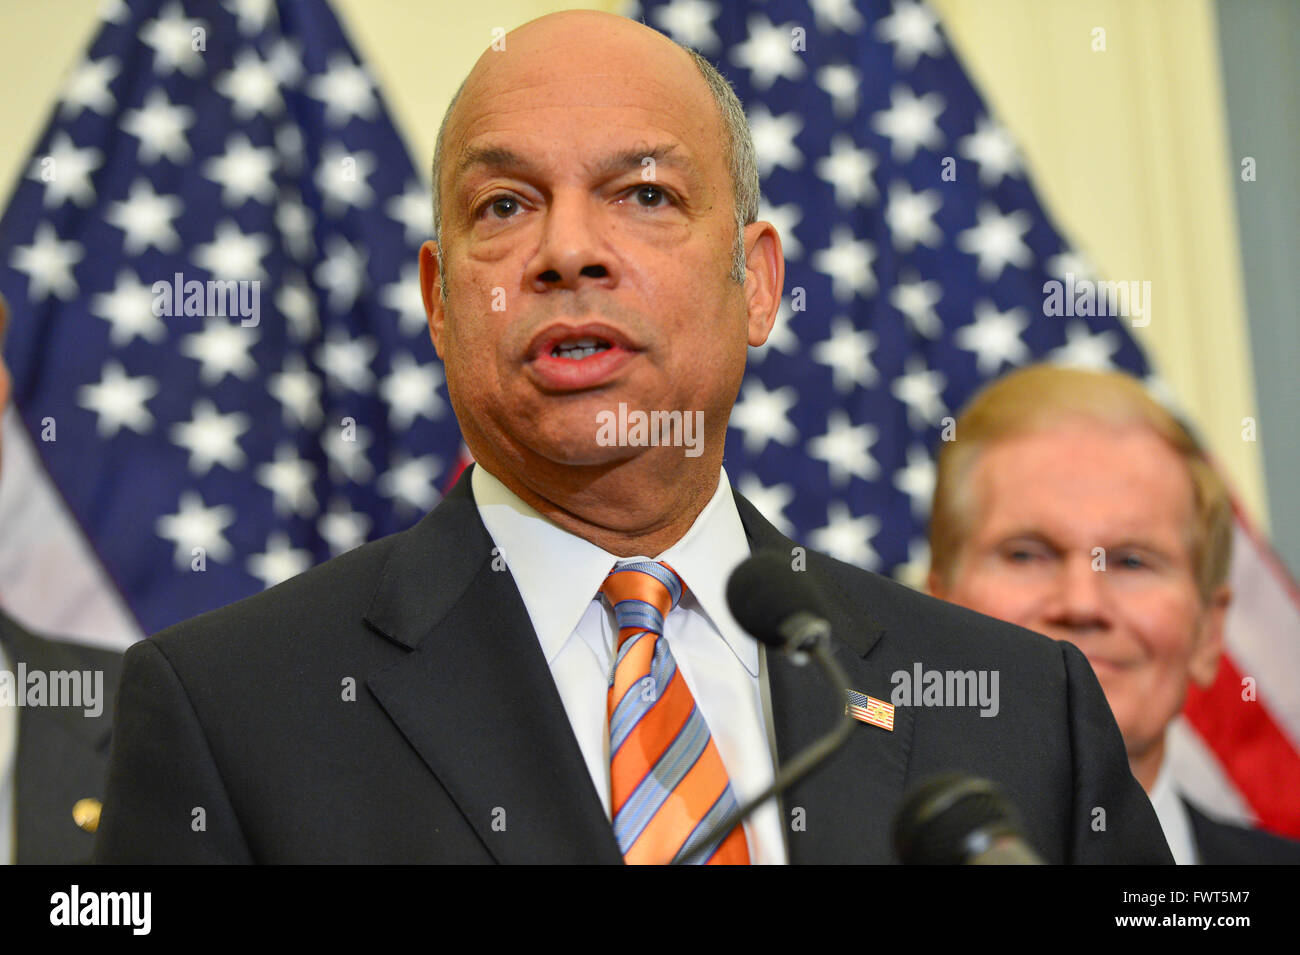 Department of Homeland Security Secretary Jeh Johnson joined by Democratic Senators announces a new proposal to strengthen U.S. airport security on Capitol Hill April 5, 2016 in Washington, DC. Stock Photo